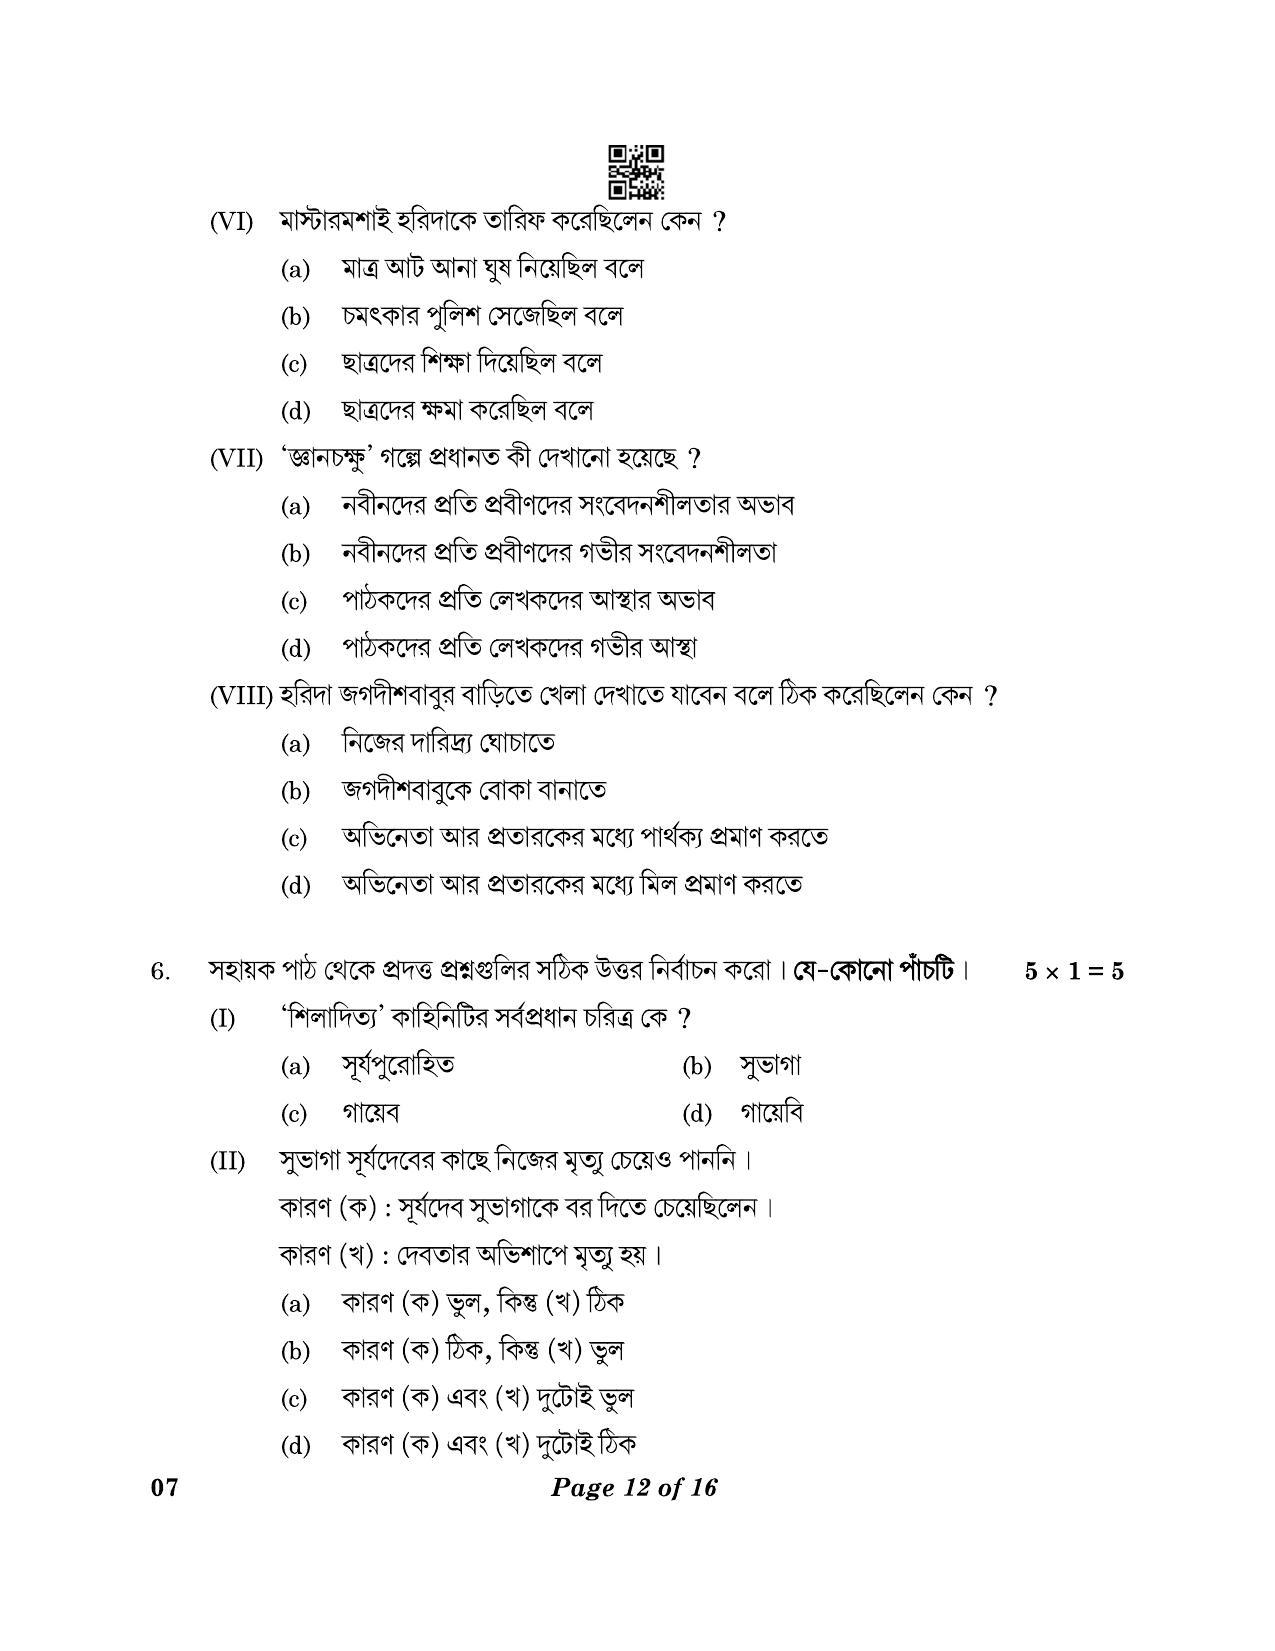 CBSE Class 10 07_Bengali 2023 Question Paper - Page 12